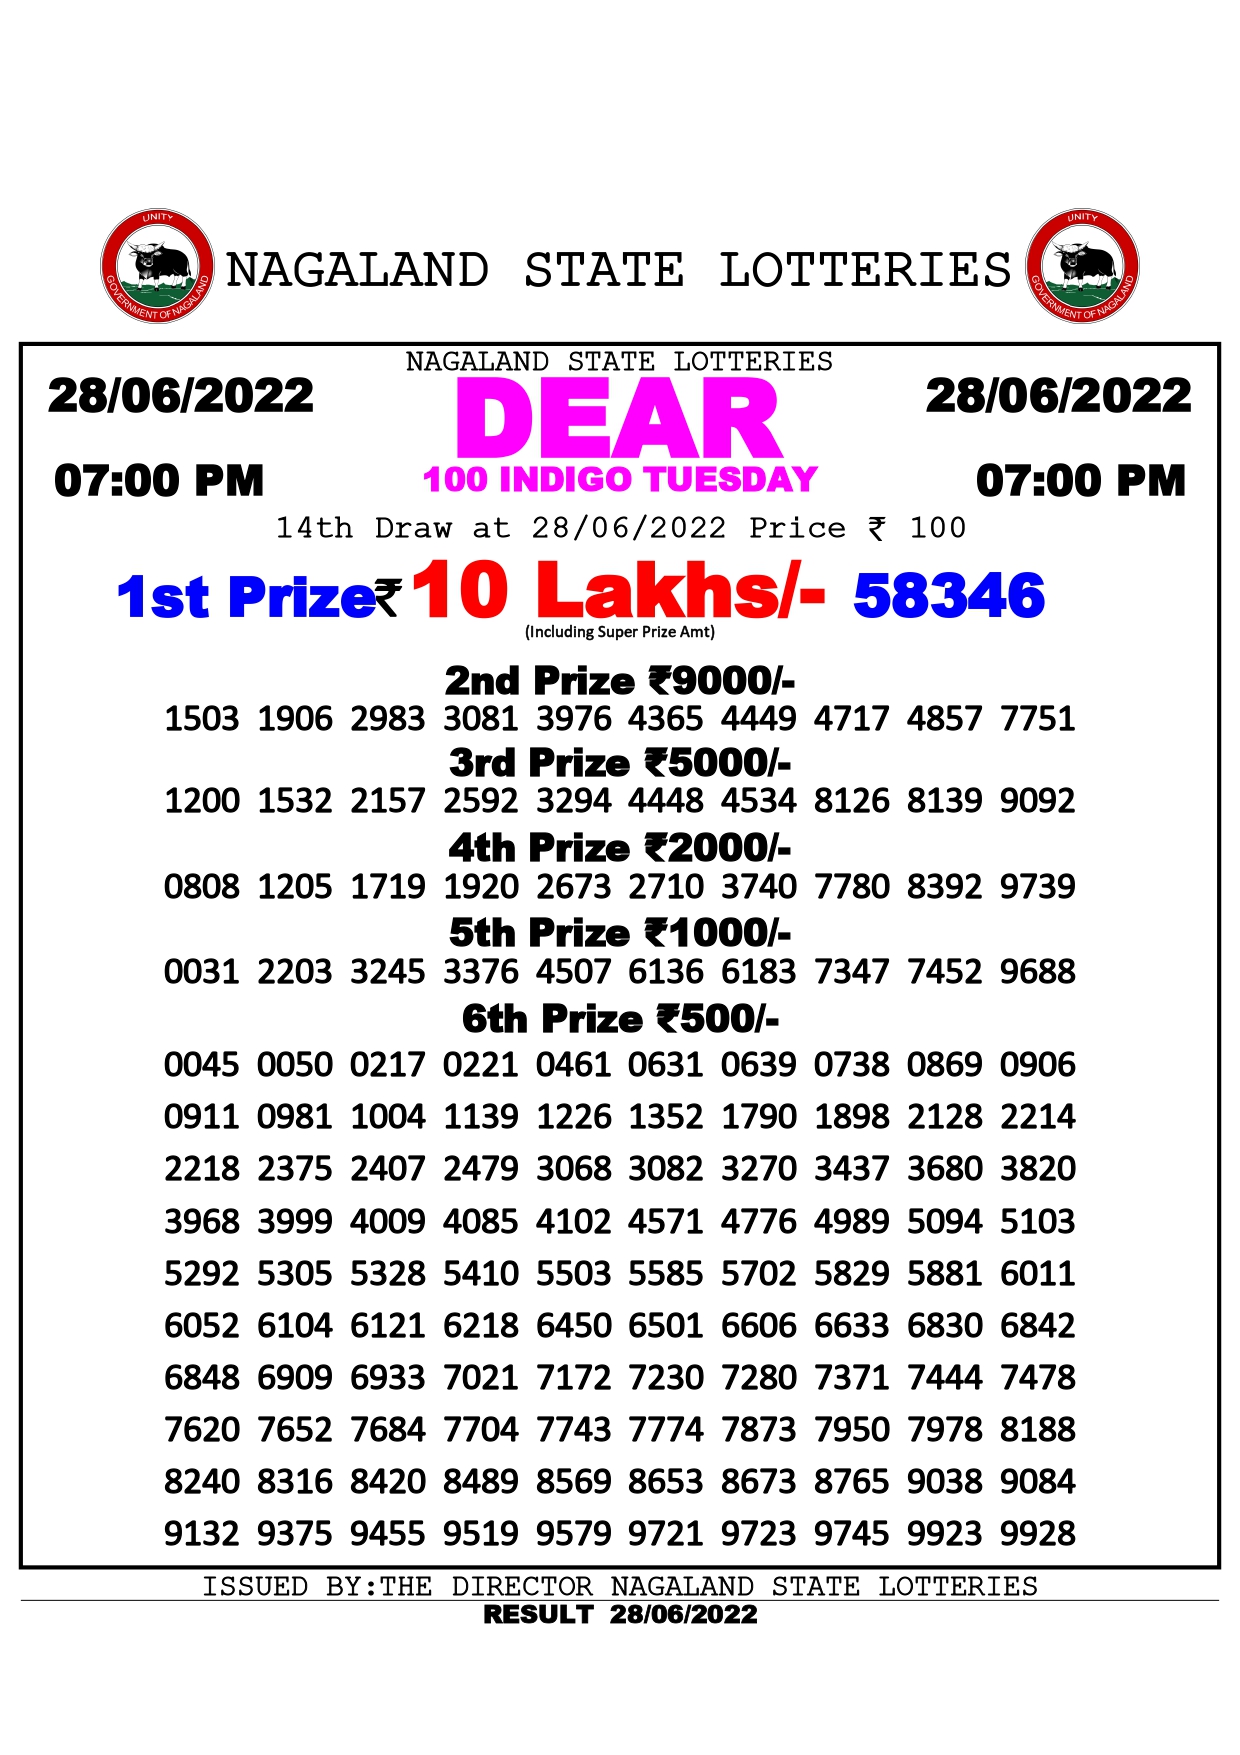 Download Result of Nagaland State Dear 100 Draw 28-06-2022 Draw at 7:00Pm